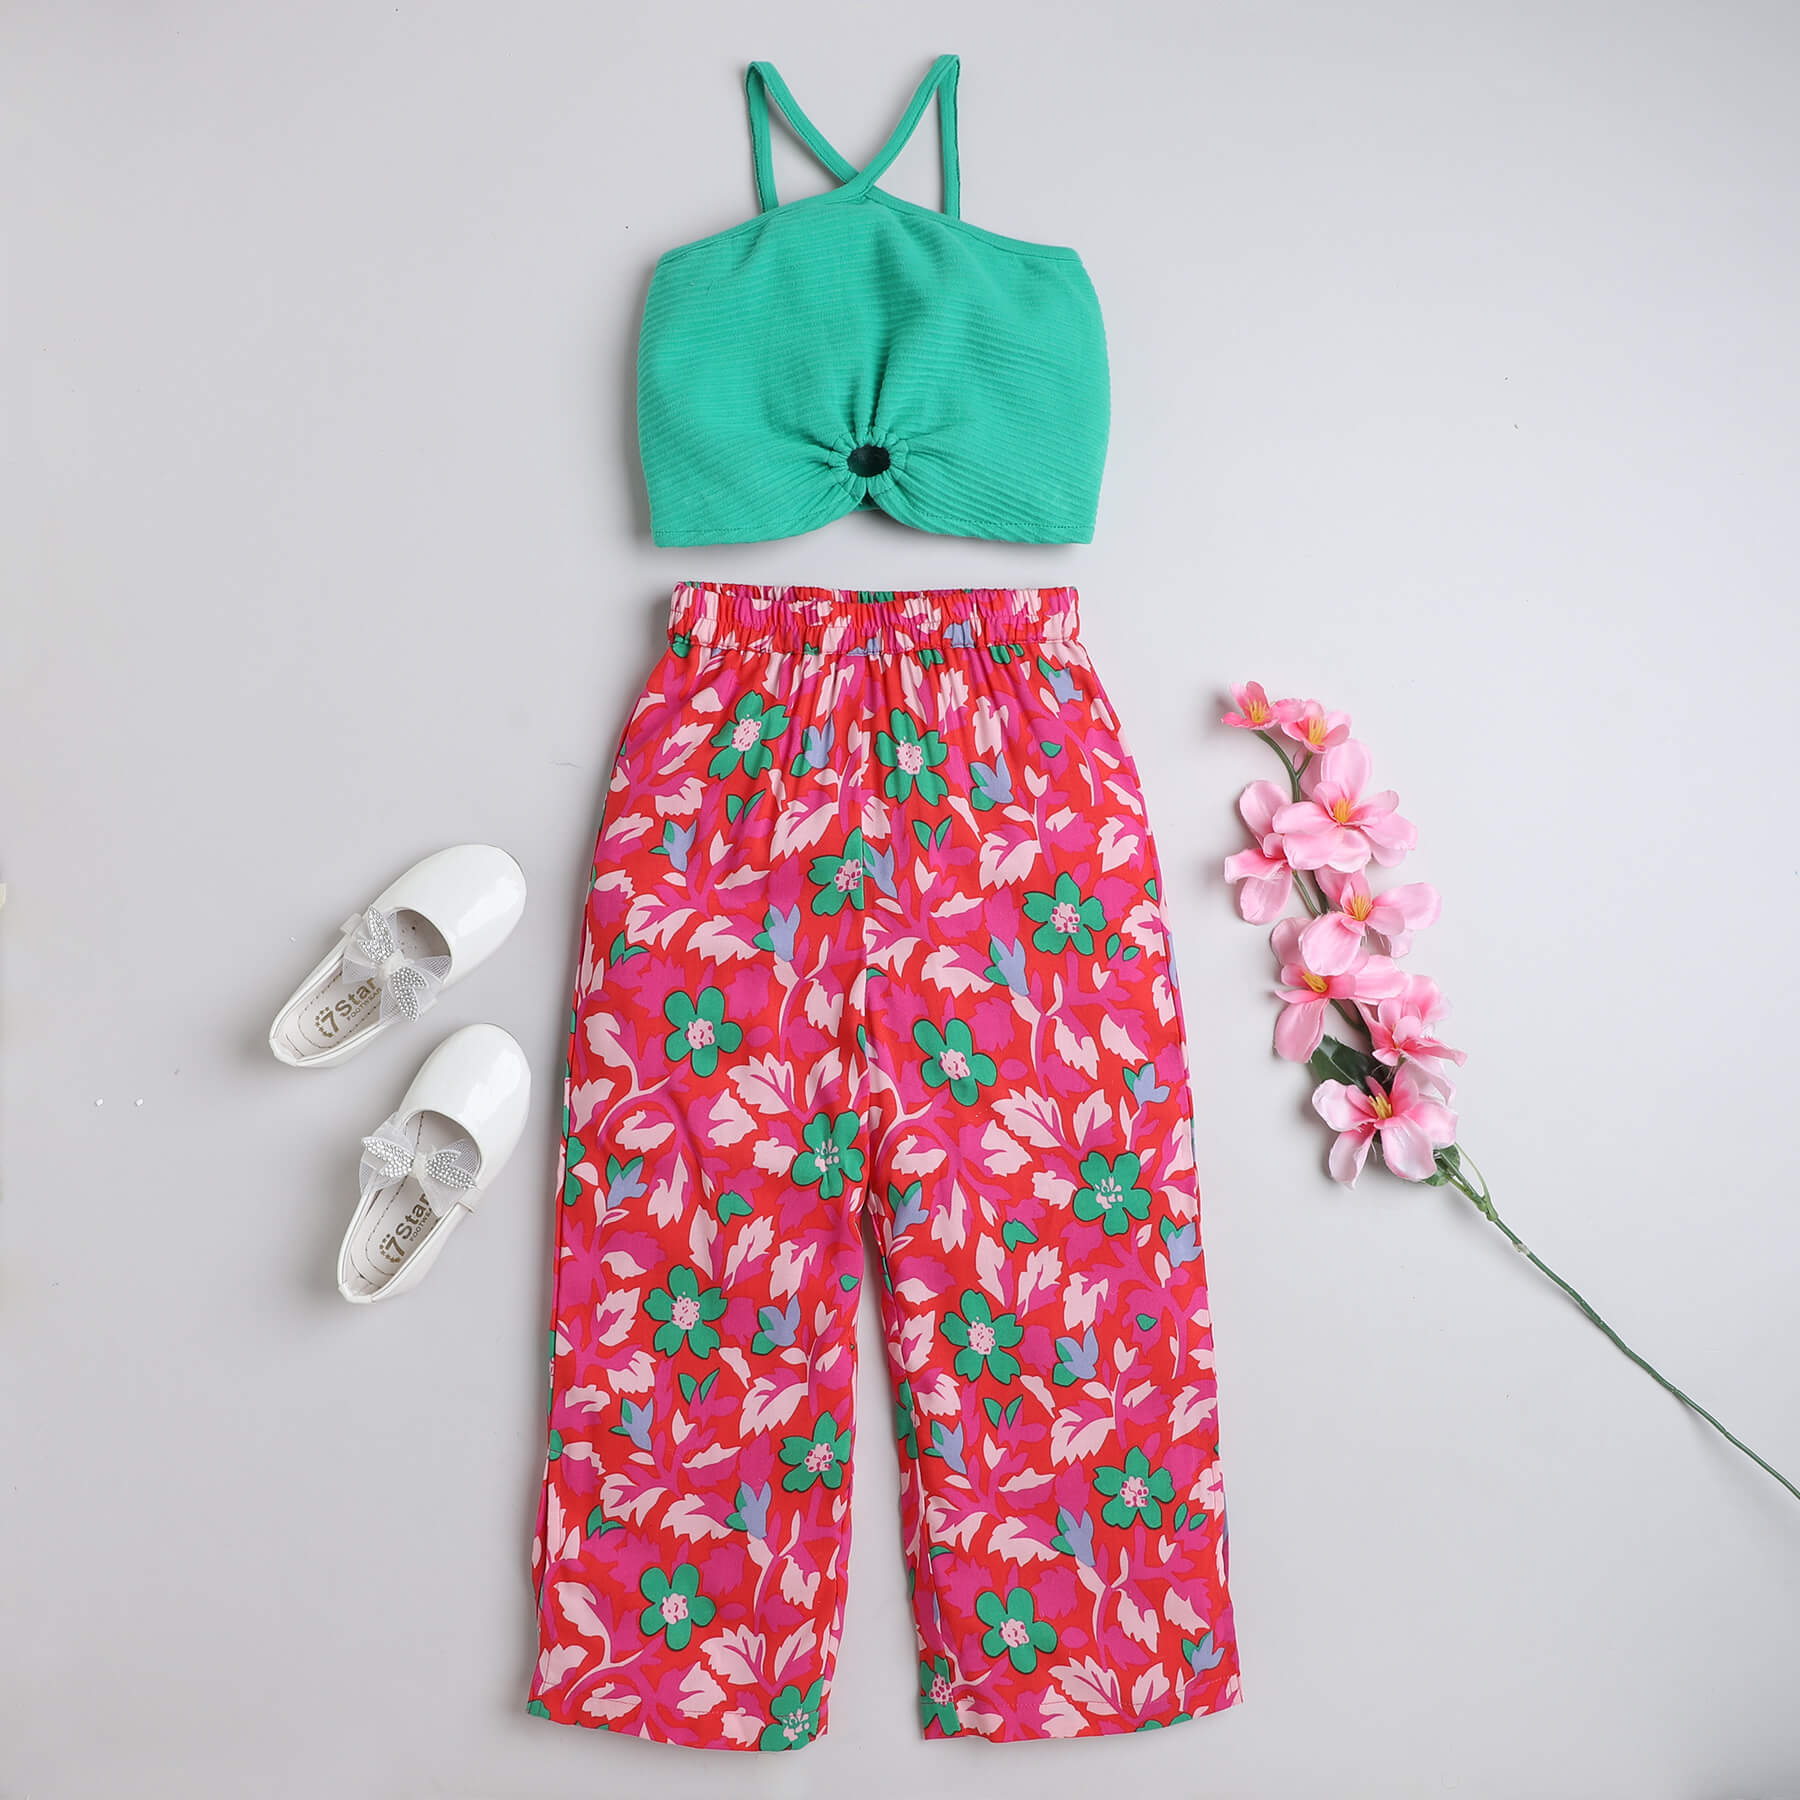 Taffykids sleeveless halter neck cut-out detail crop top and  floral printed pant set-Green/Pink